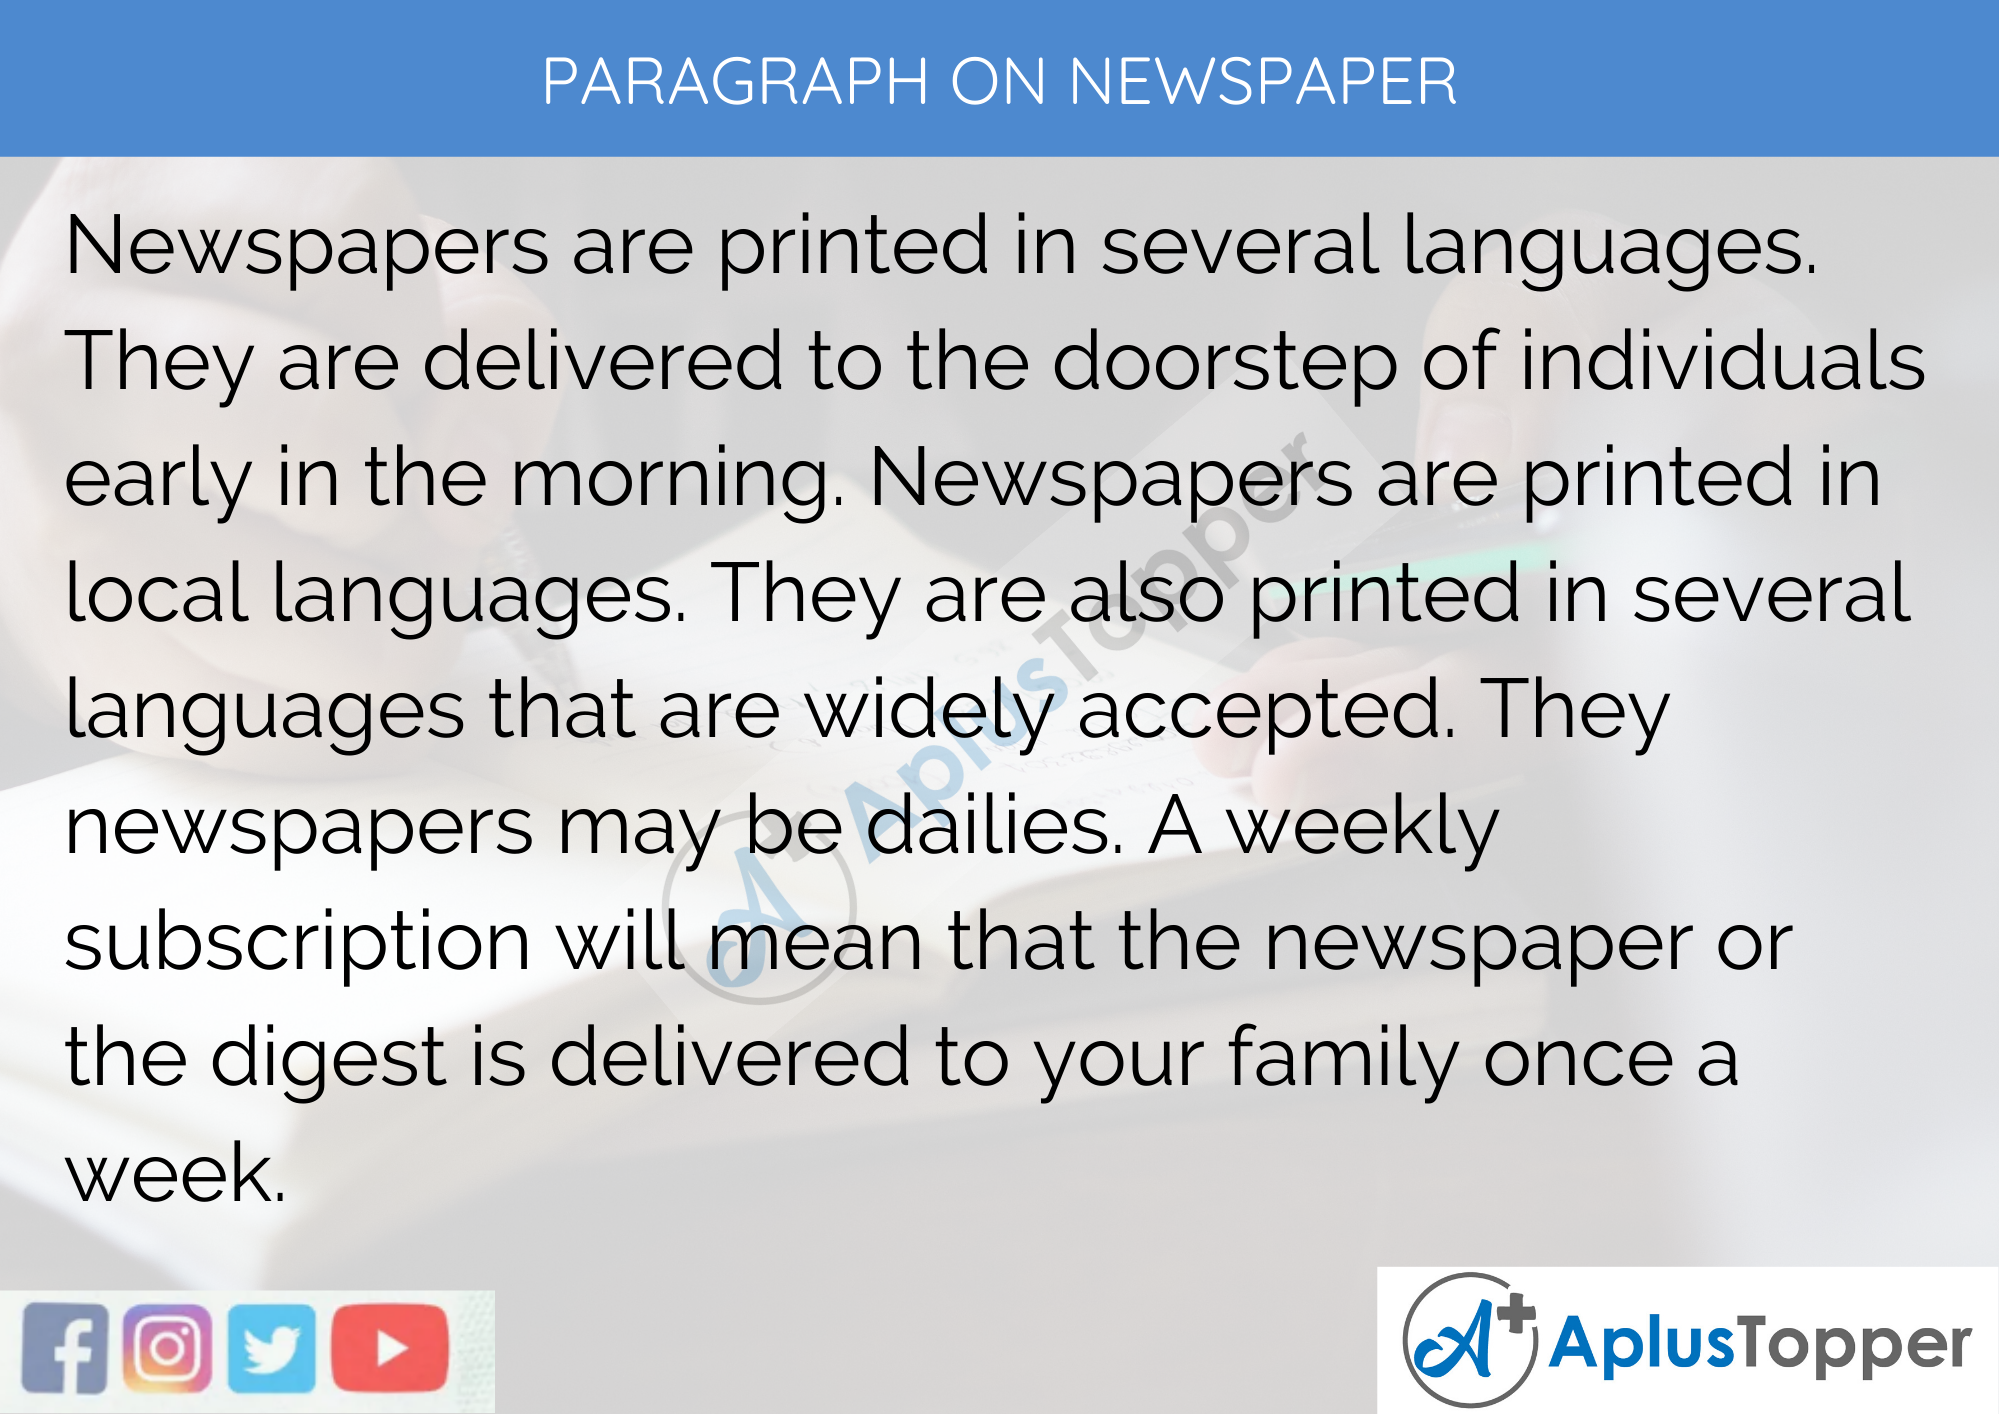 Paragraph On Newspaper - 100 Words for Classes 1, 2, 3 Kids